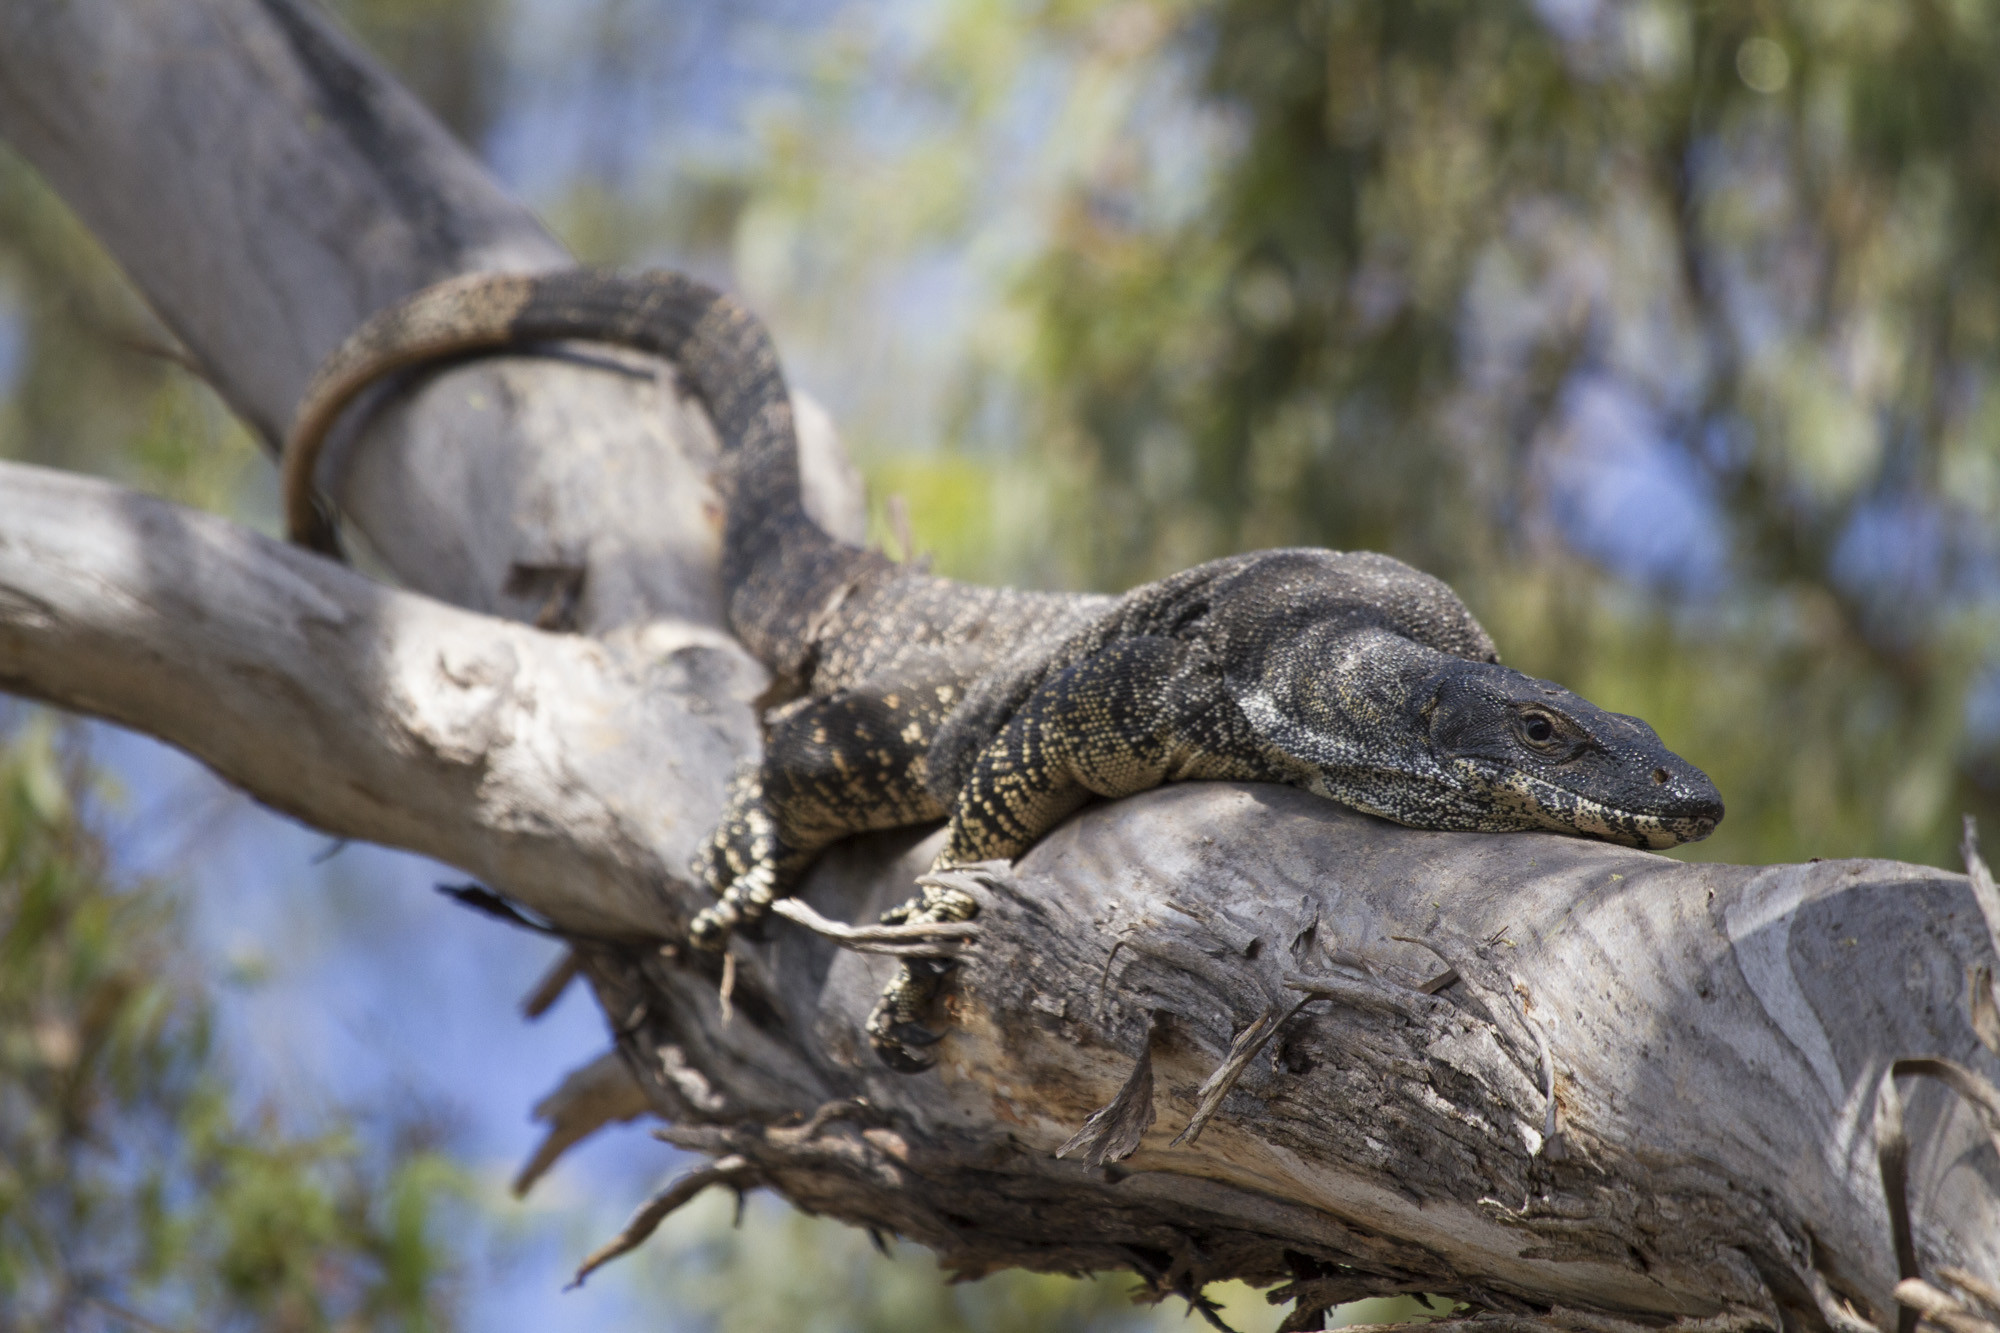 Goanna lounging on a tree branch in the Grampians